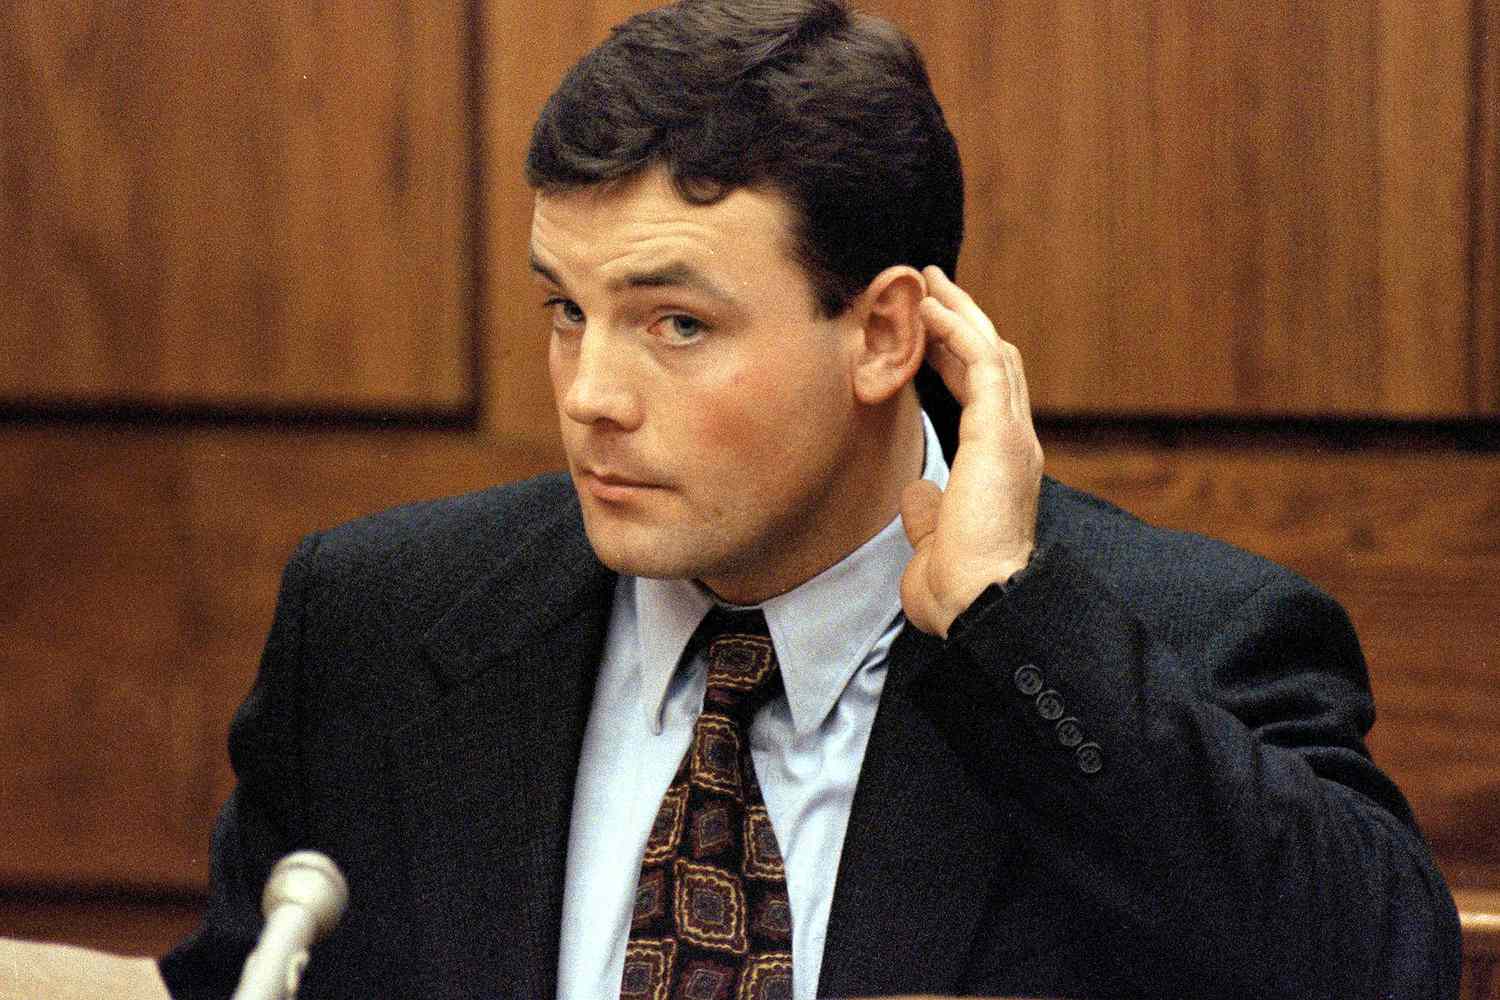 John Bobbitt Talks About His Sexual Function, 23 Years After Infamous Attac...